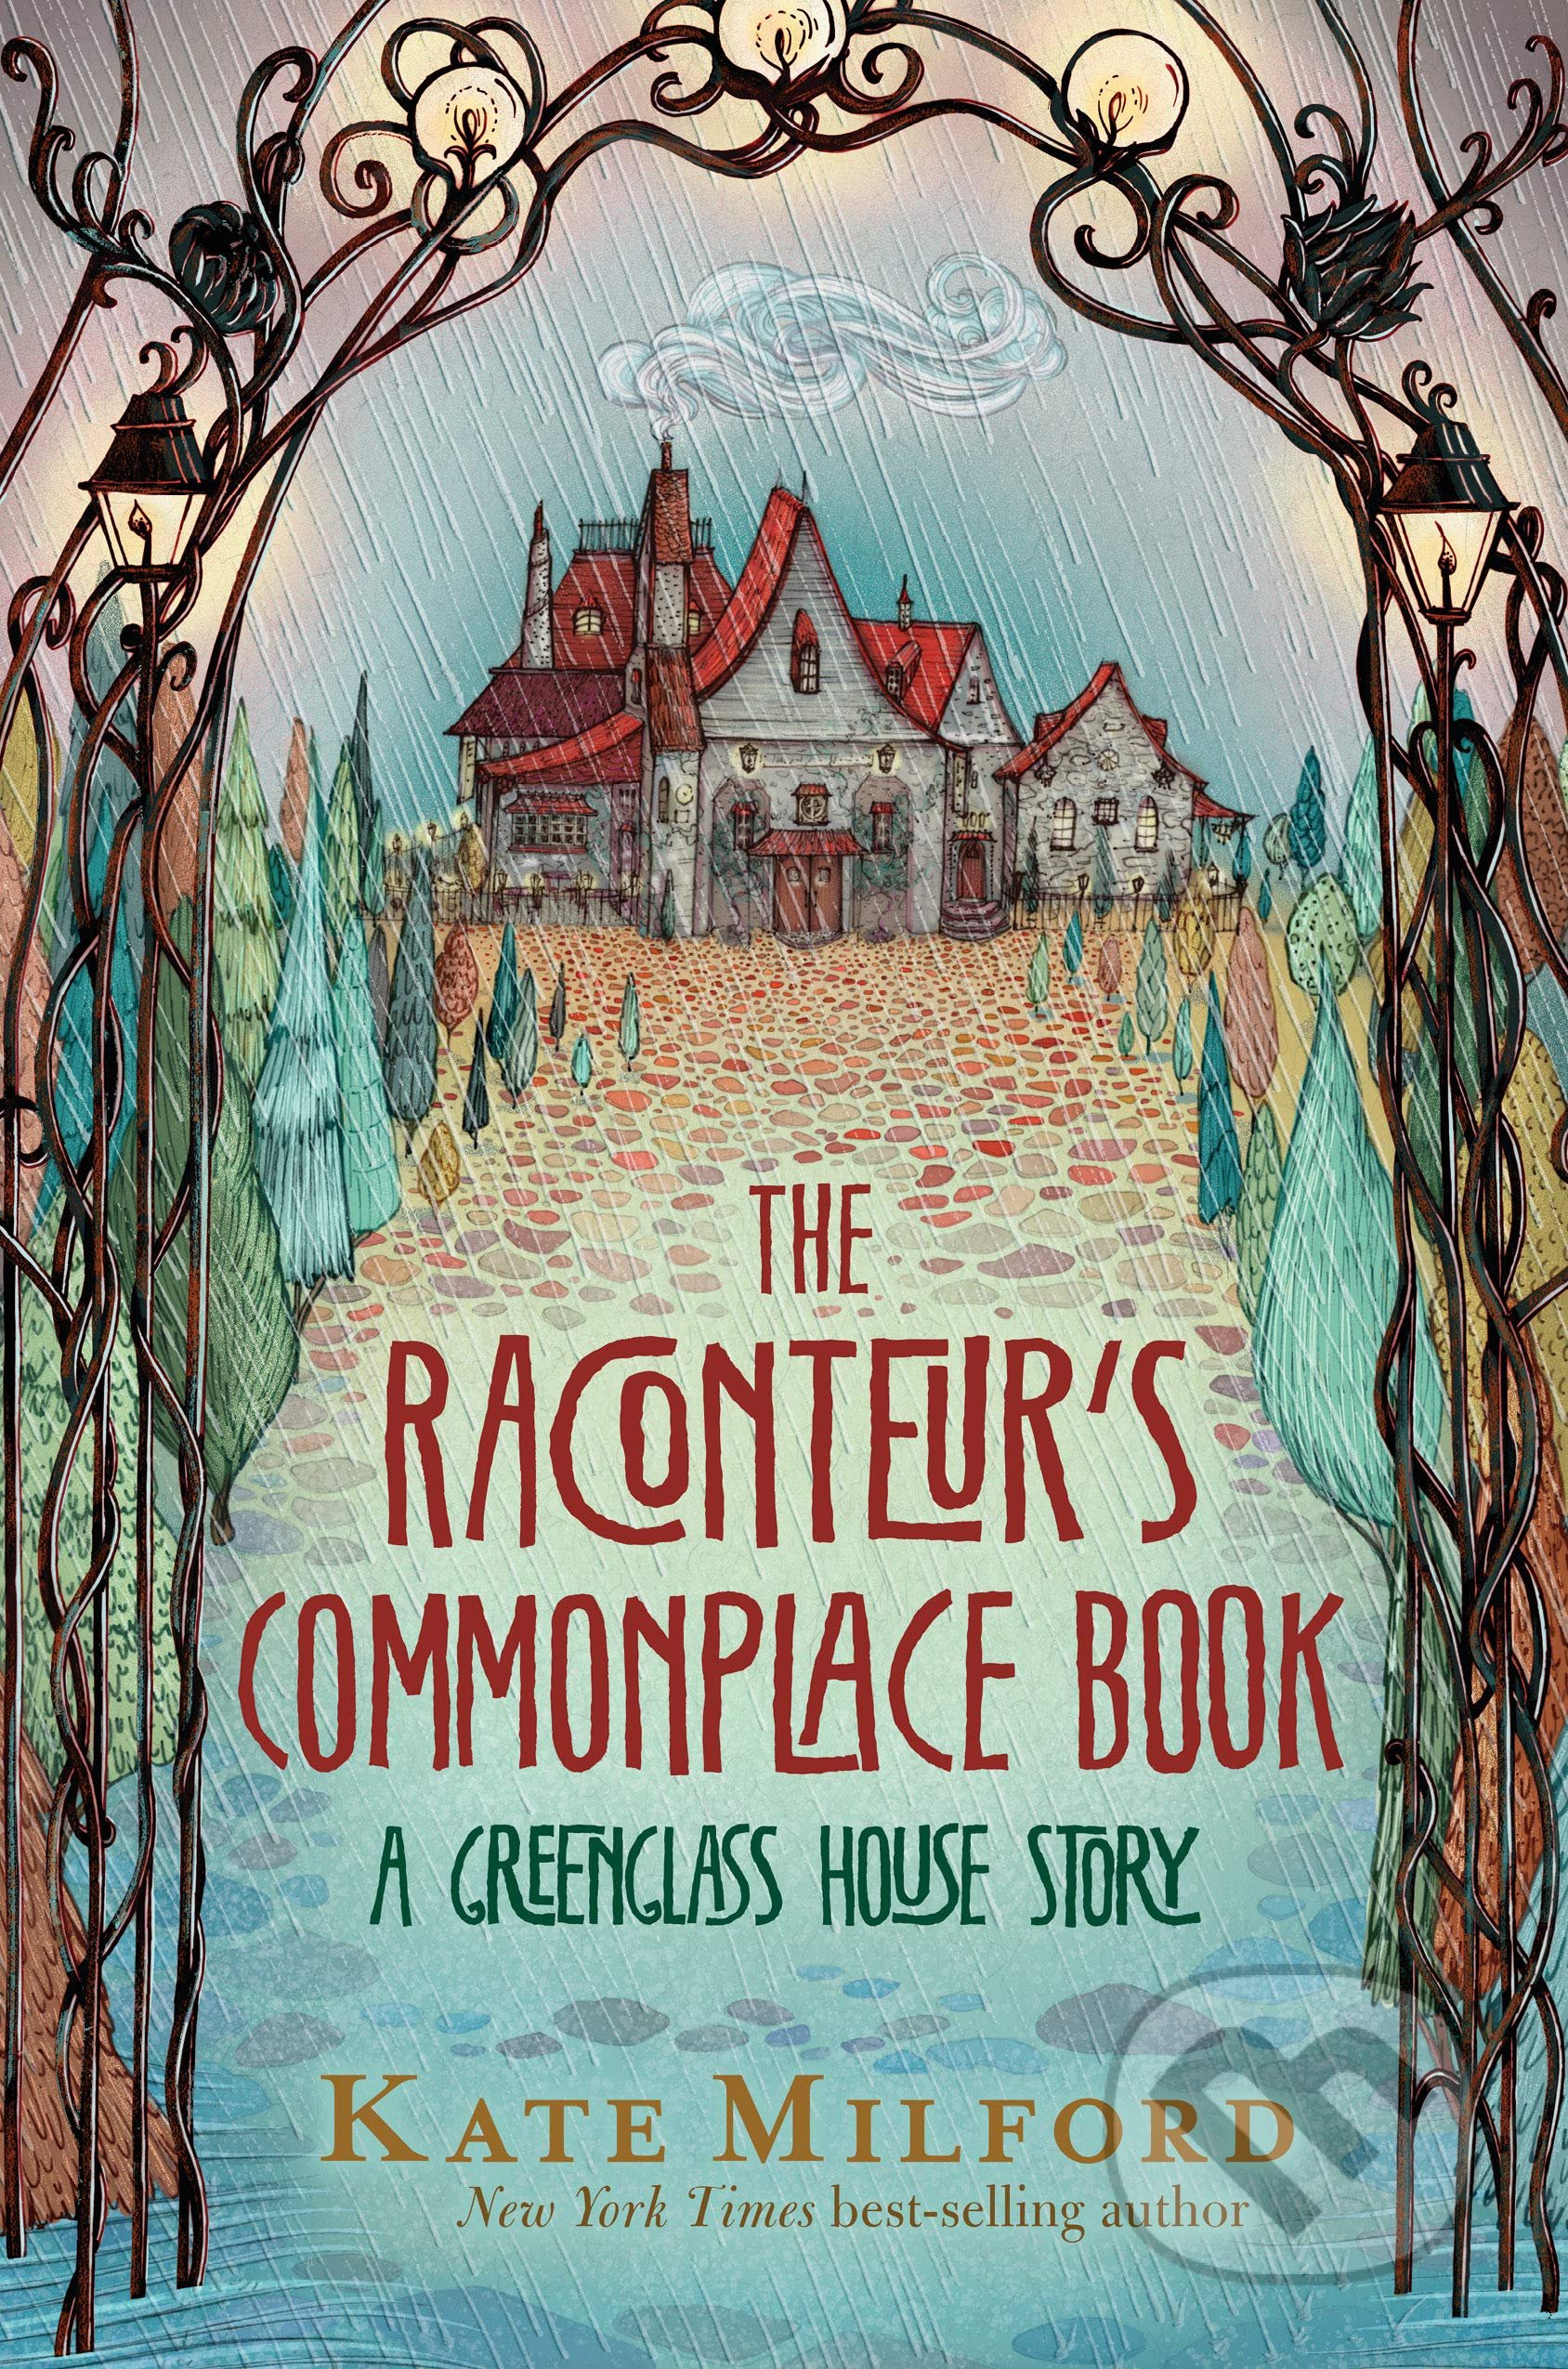 The Raconteur&#039;s Commonplace Book - Kate Milford, Clarion Books, 2021